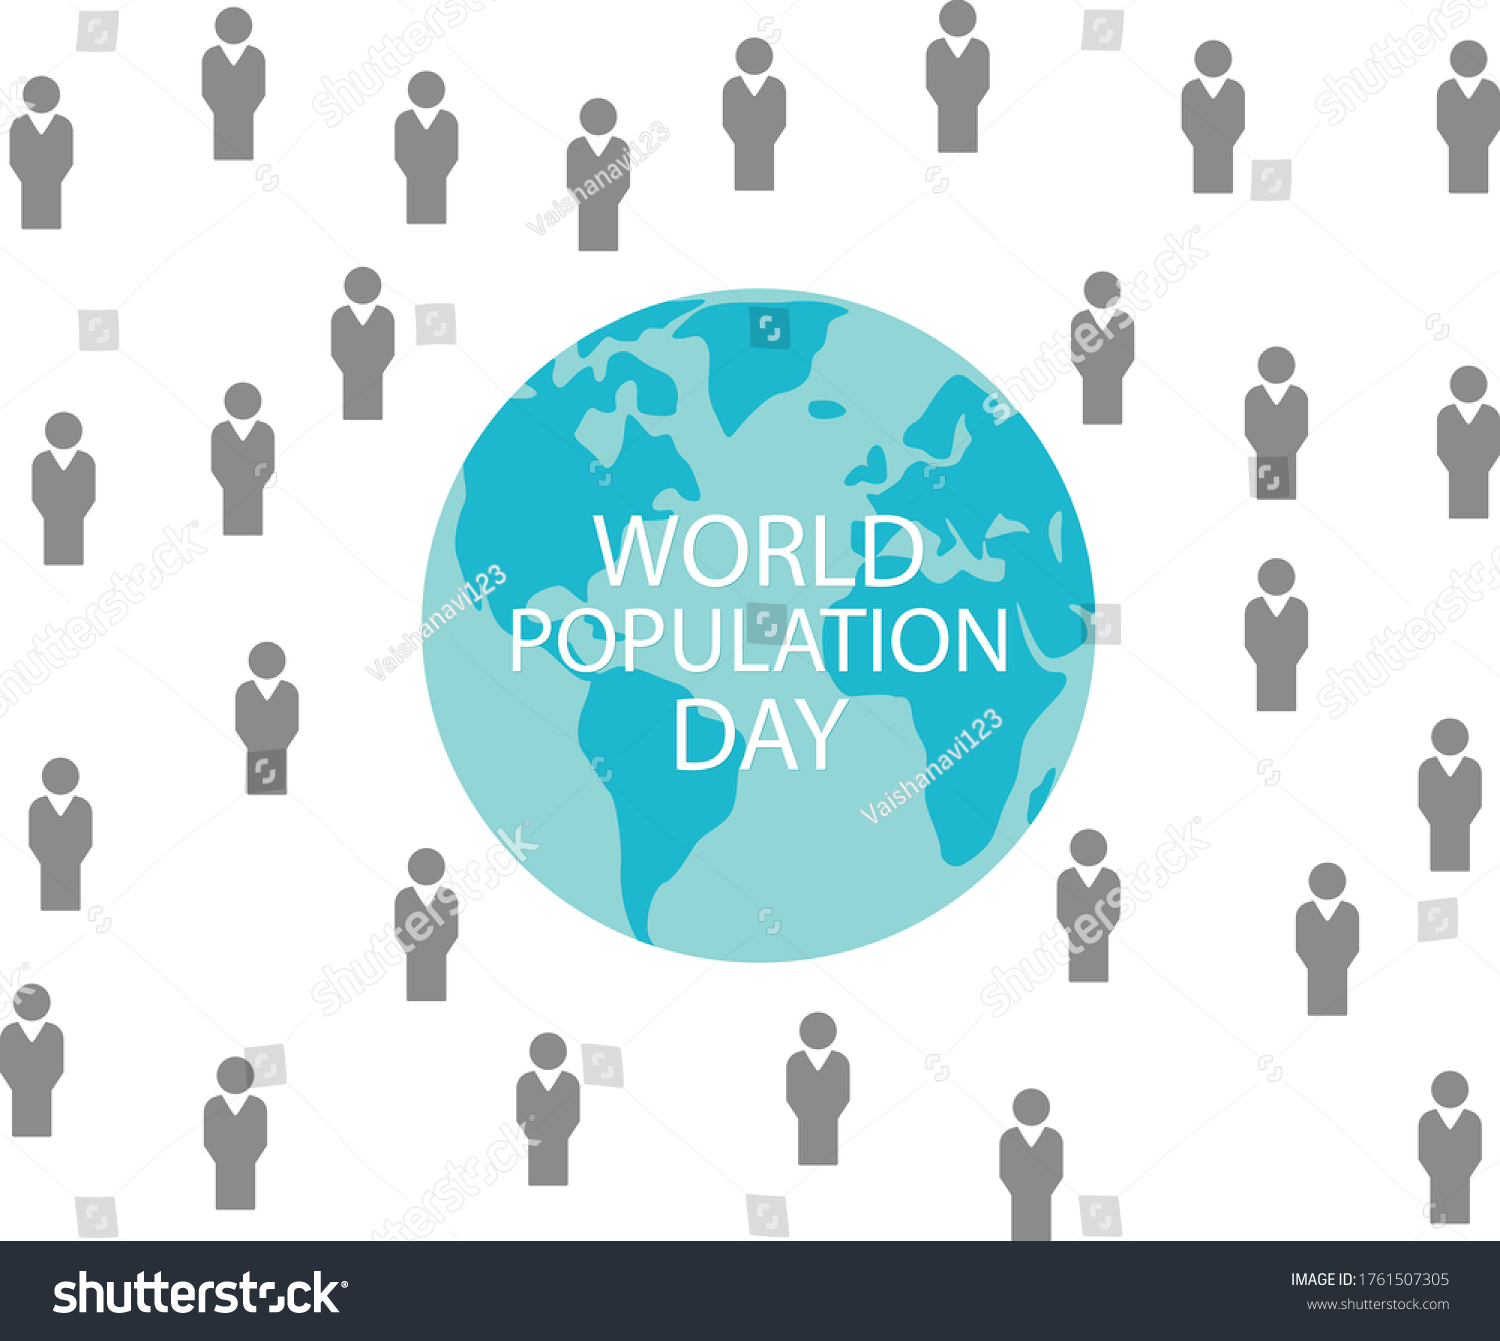 World Population Day With Map And People Royalty Free Stock Vector 1761507305 6612